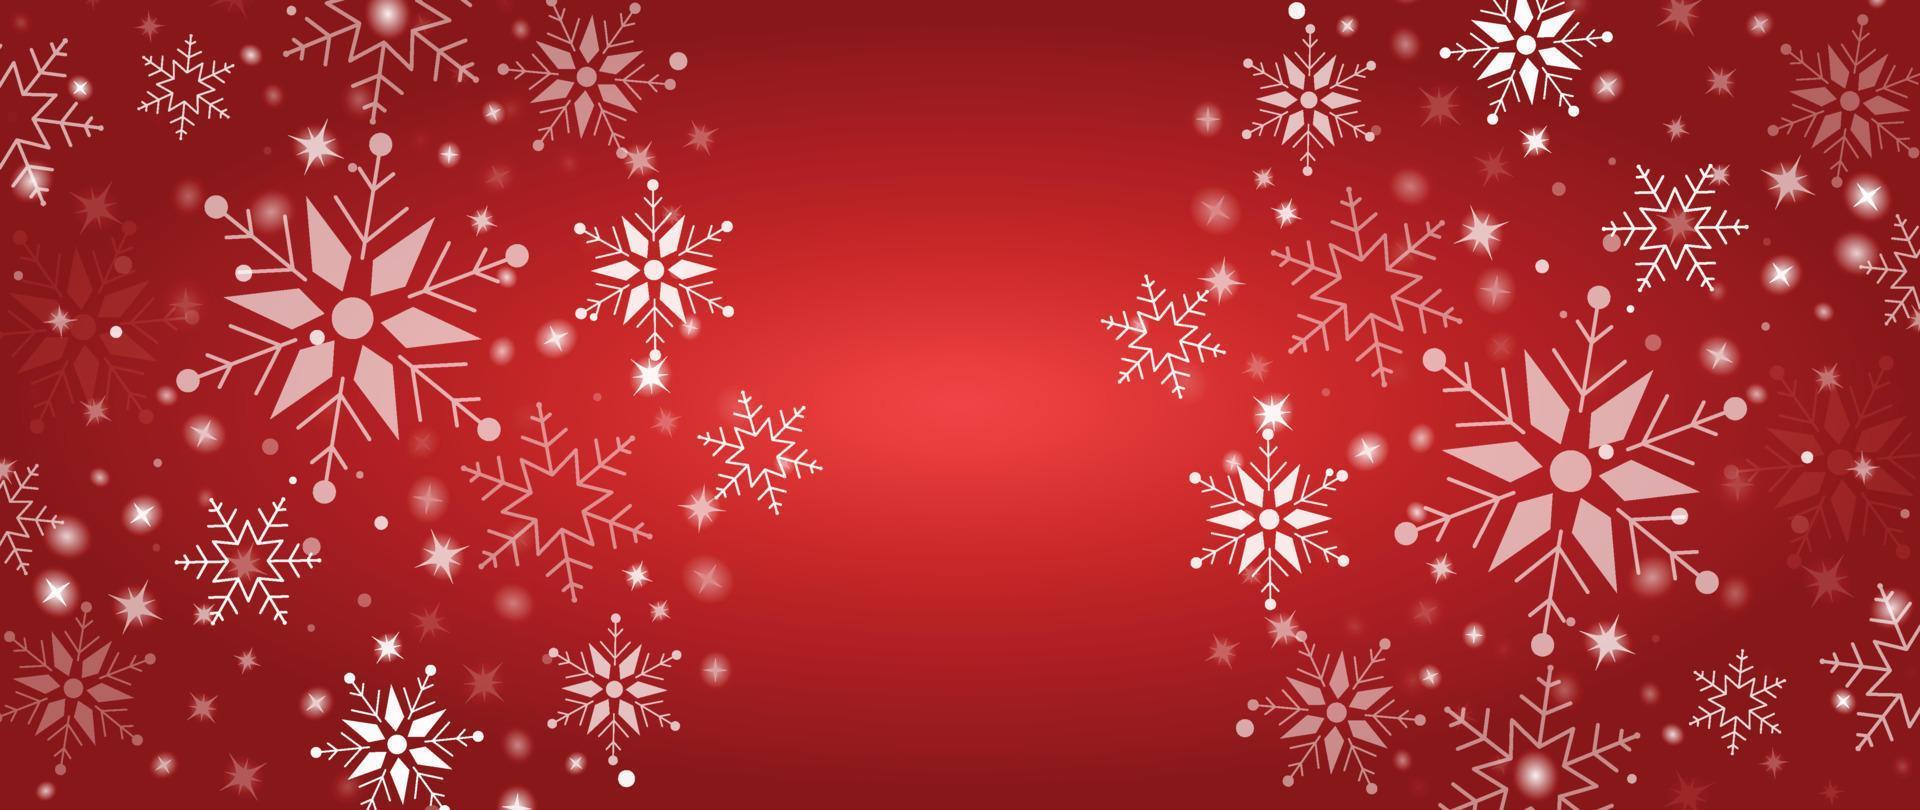 Elegant winter snowflake background vector illustration. Luxury decorative snowflake and sparkle on gradient red background. Design suitable for invitation card, greeting, wallpaper, poster, banner.